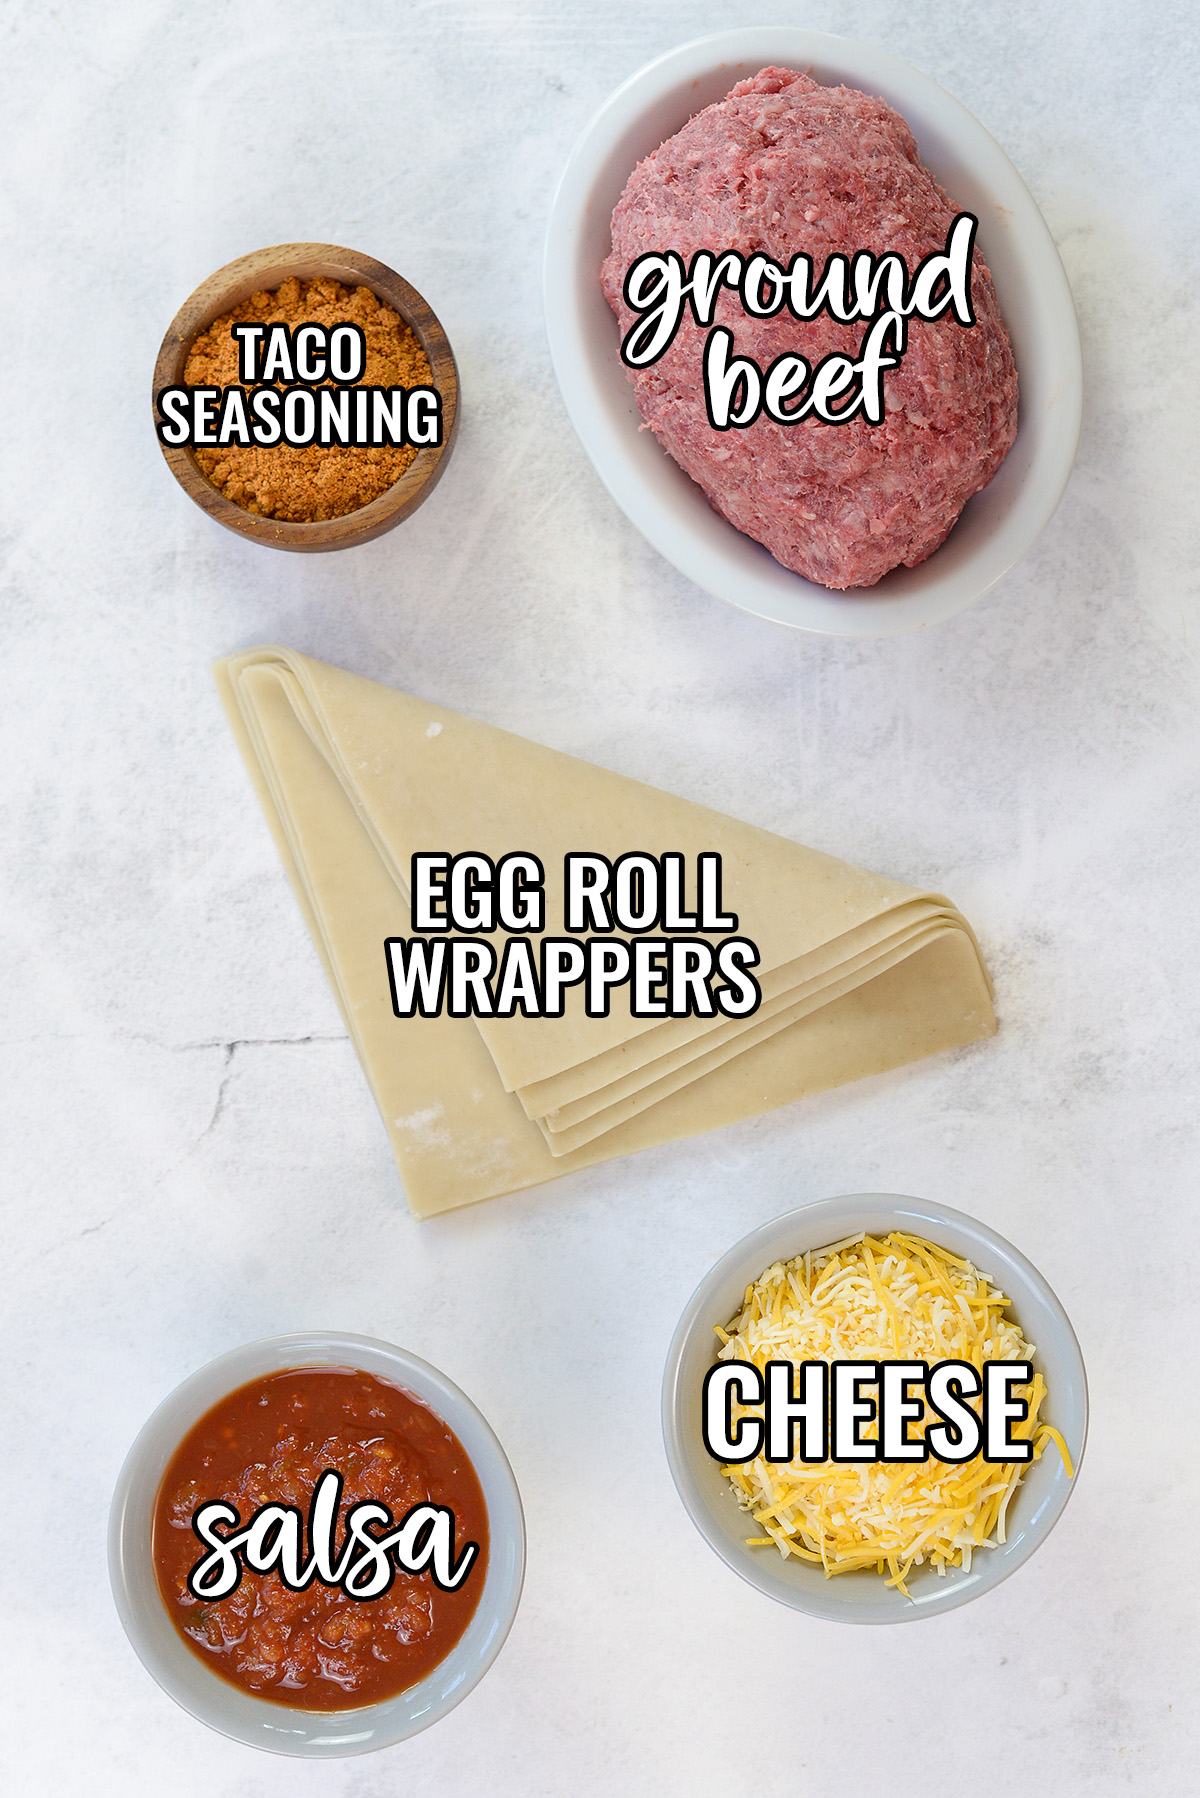 Taco egg roll ingredients spread out on a countertop.